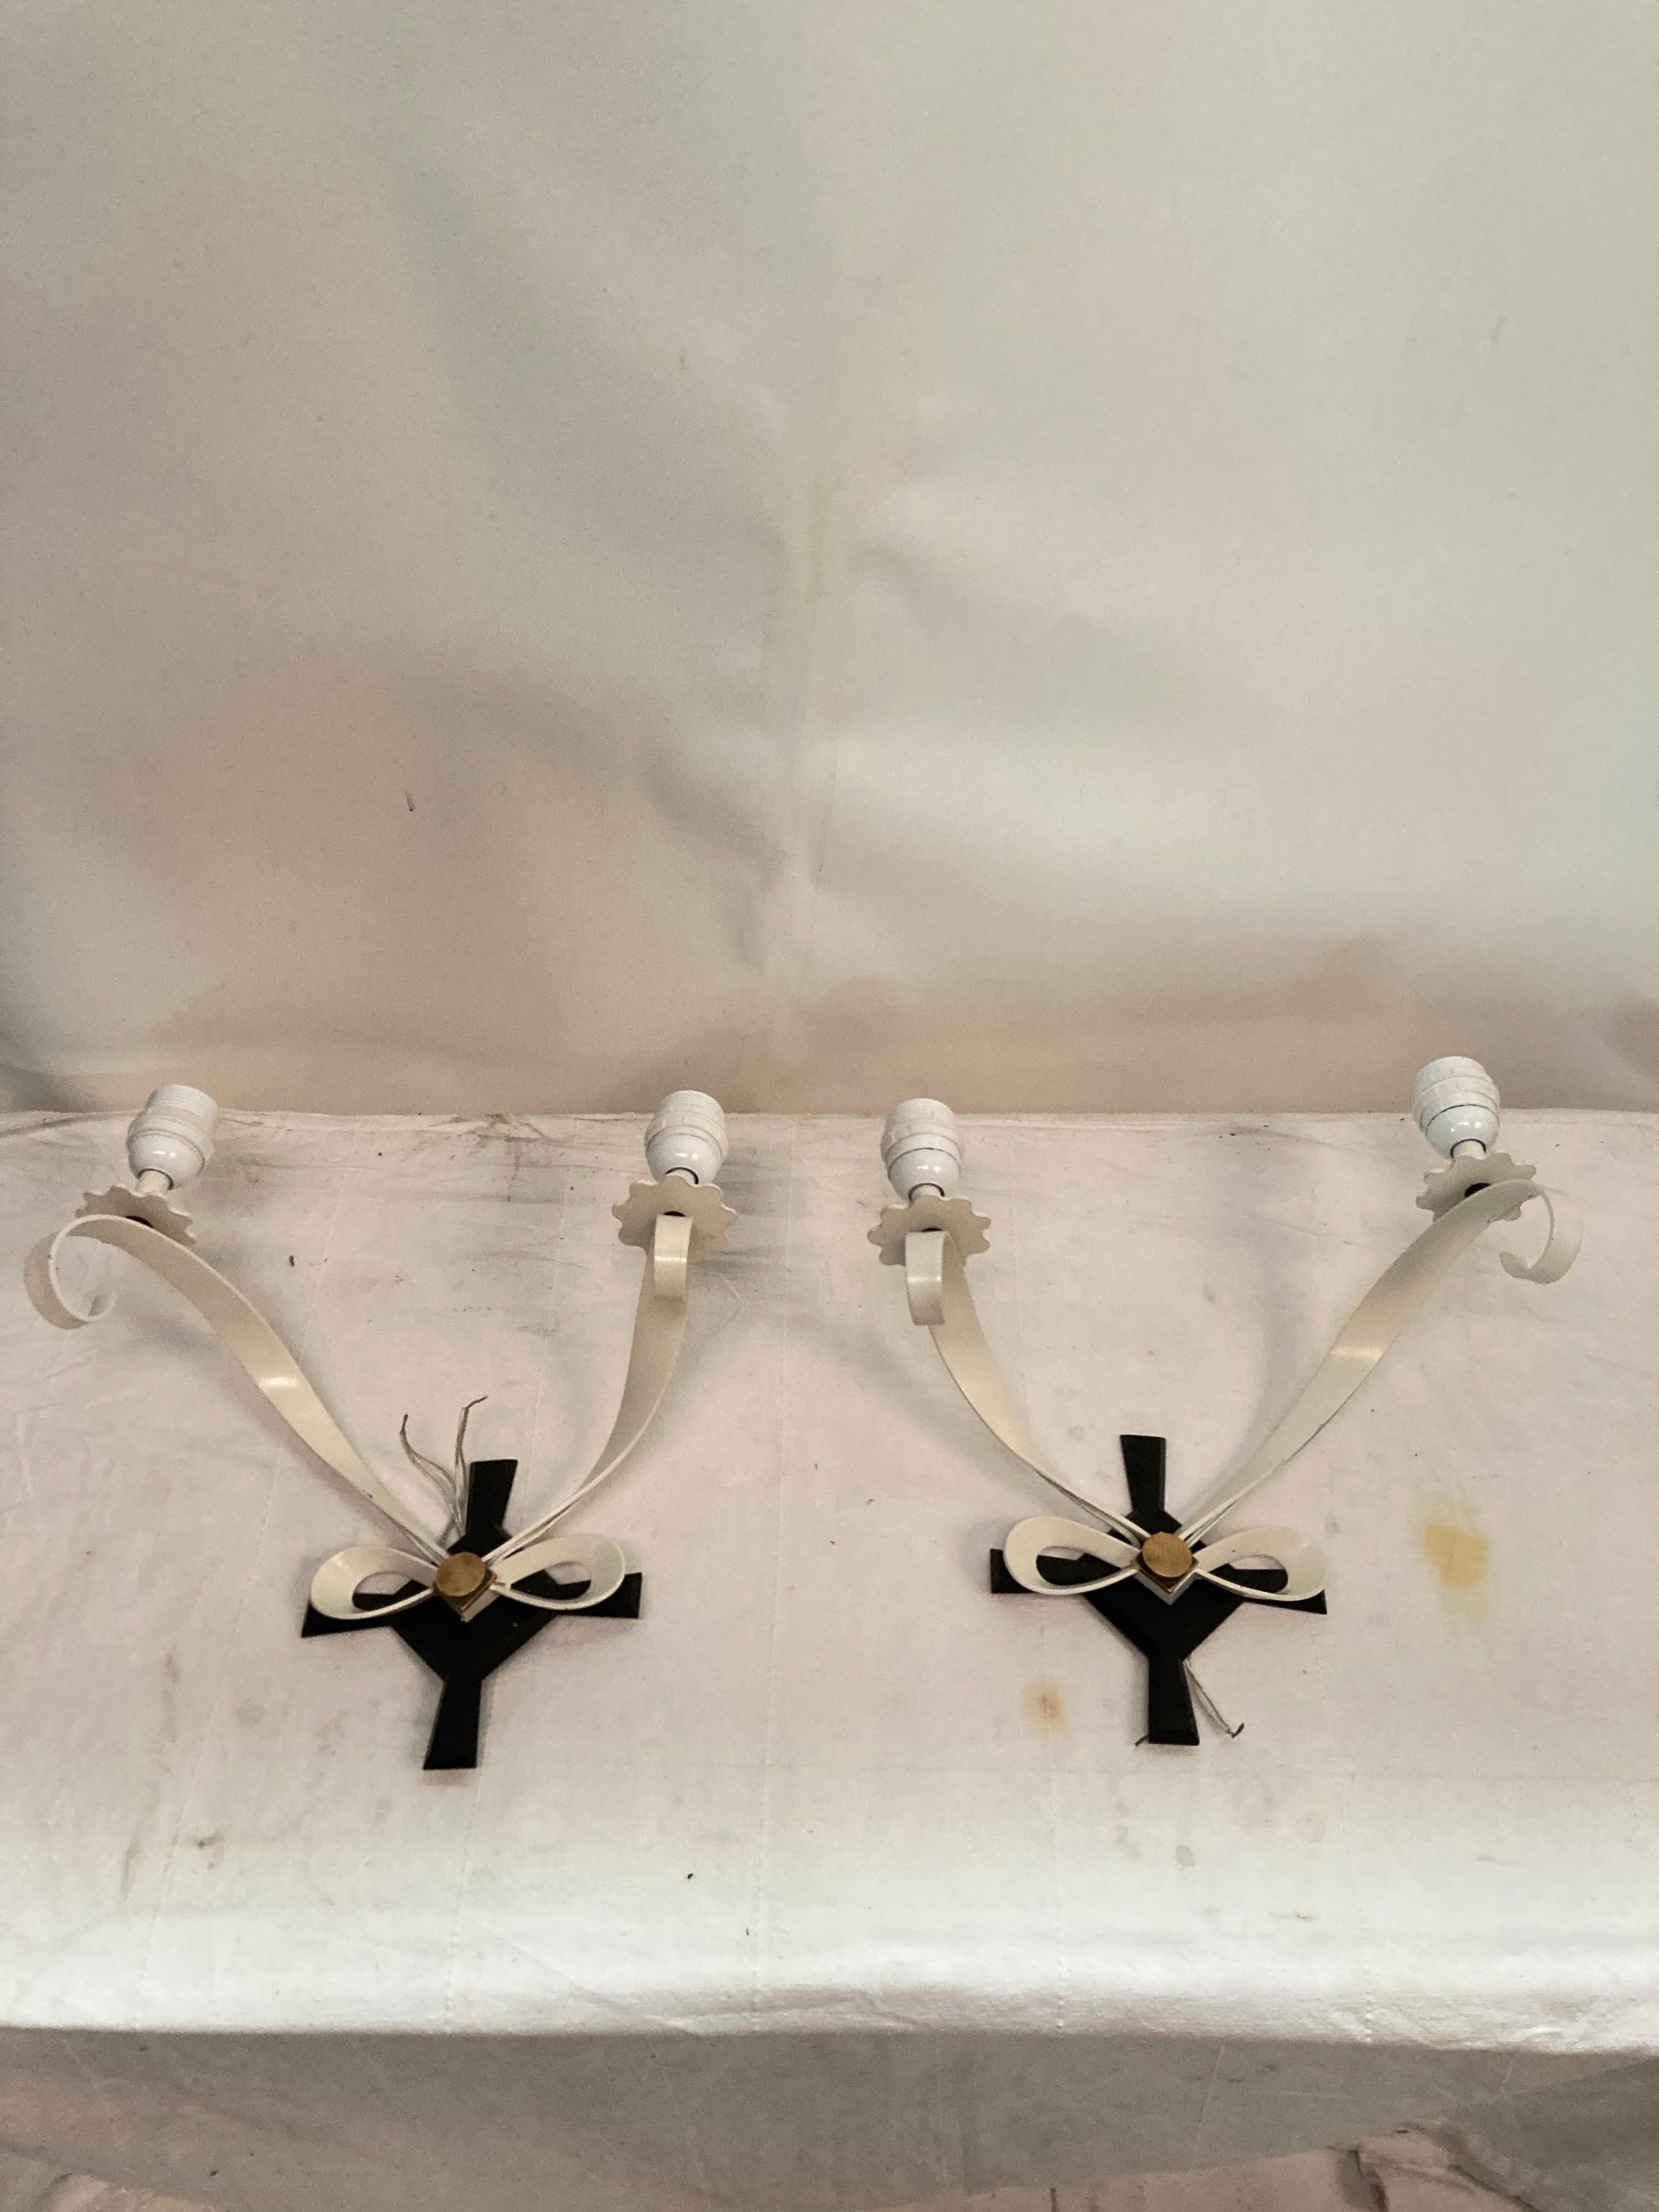 Rare pair of 1940's sconces designed By René Drouet
France
No shade included
Re - wired with E27